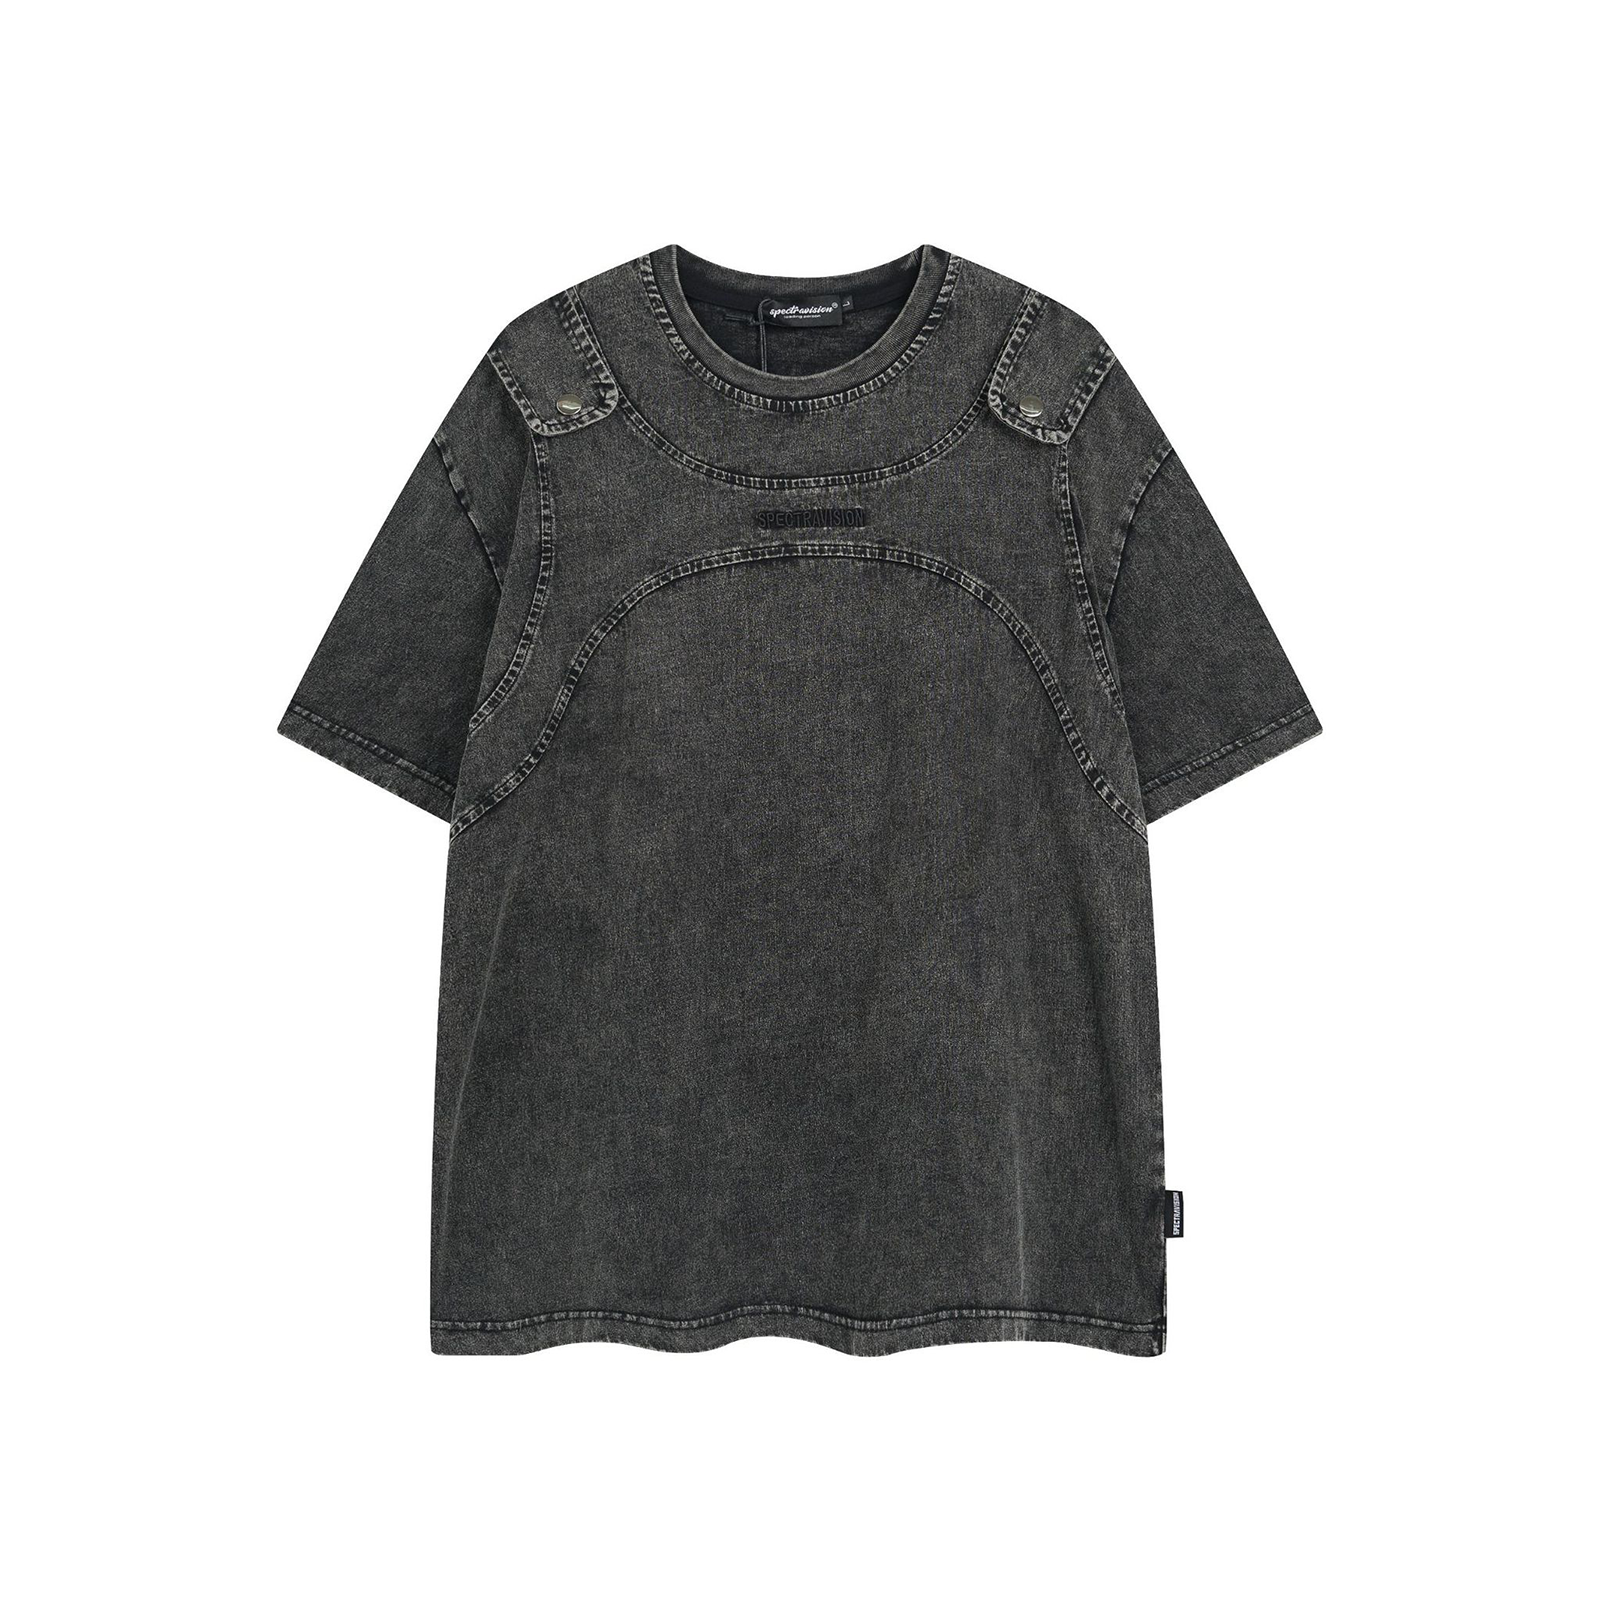 Retro Heavy Embroidery Washed And Distressed Summer T-shirt